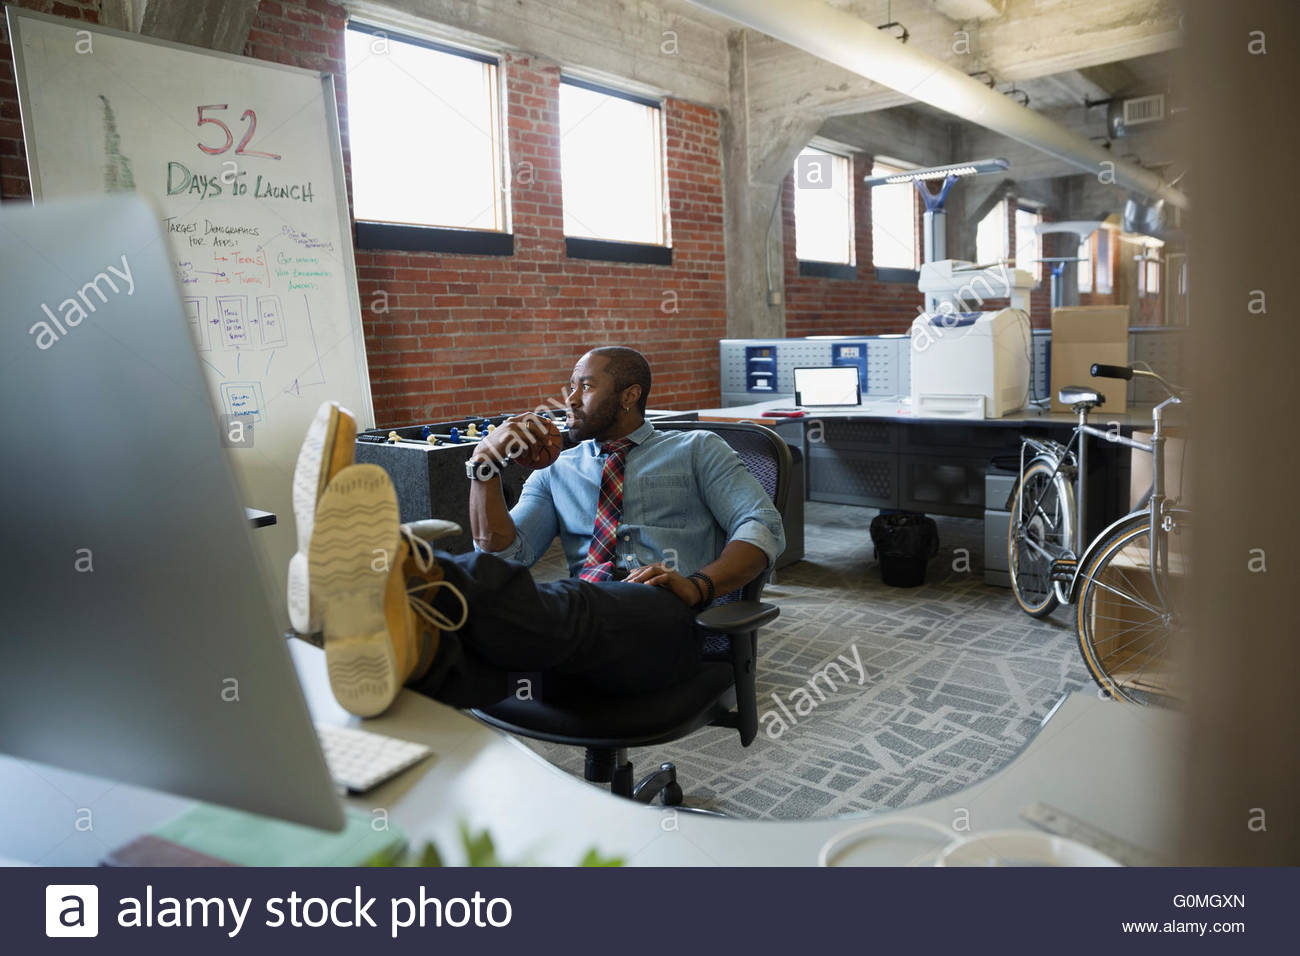 Entrepreneur with feet up on desk new office Stock Photo